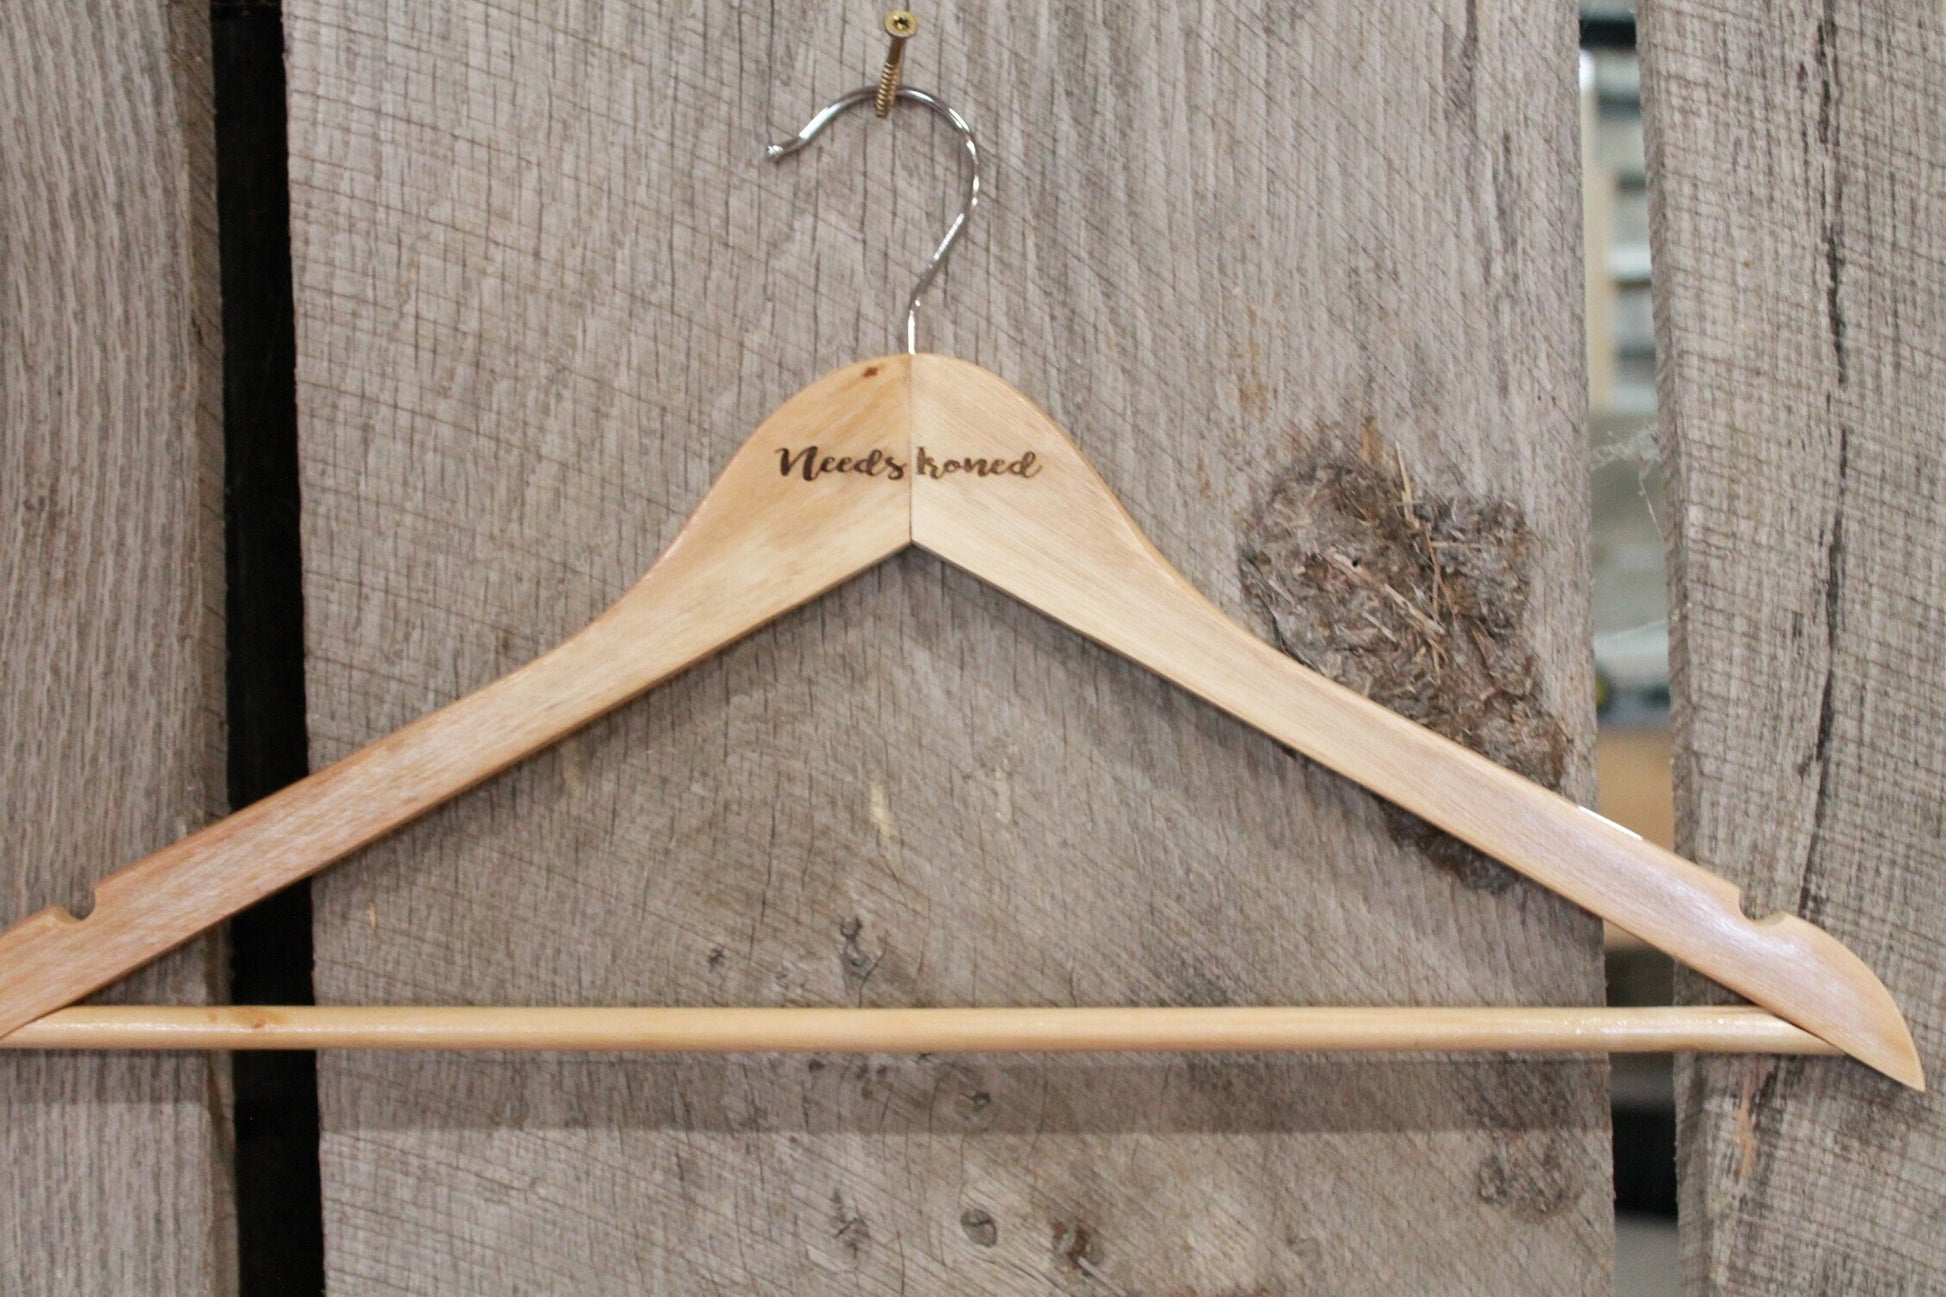 Needs Ironed Iron Clothes Hanger Engraved Hard Wood Sturdy Note Message Organization Wash Laundry Room